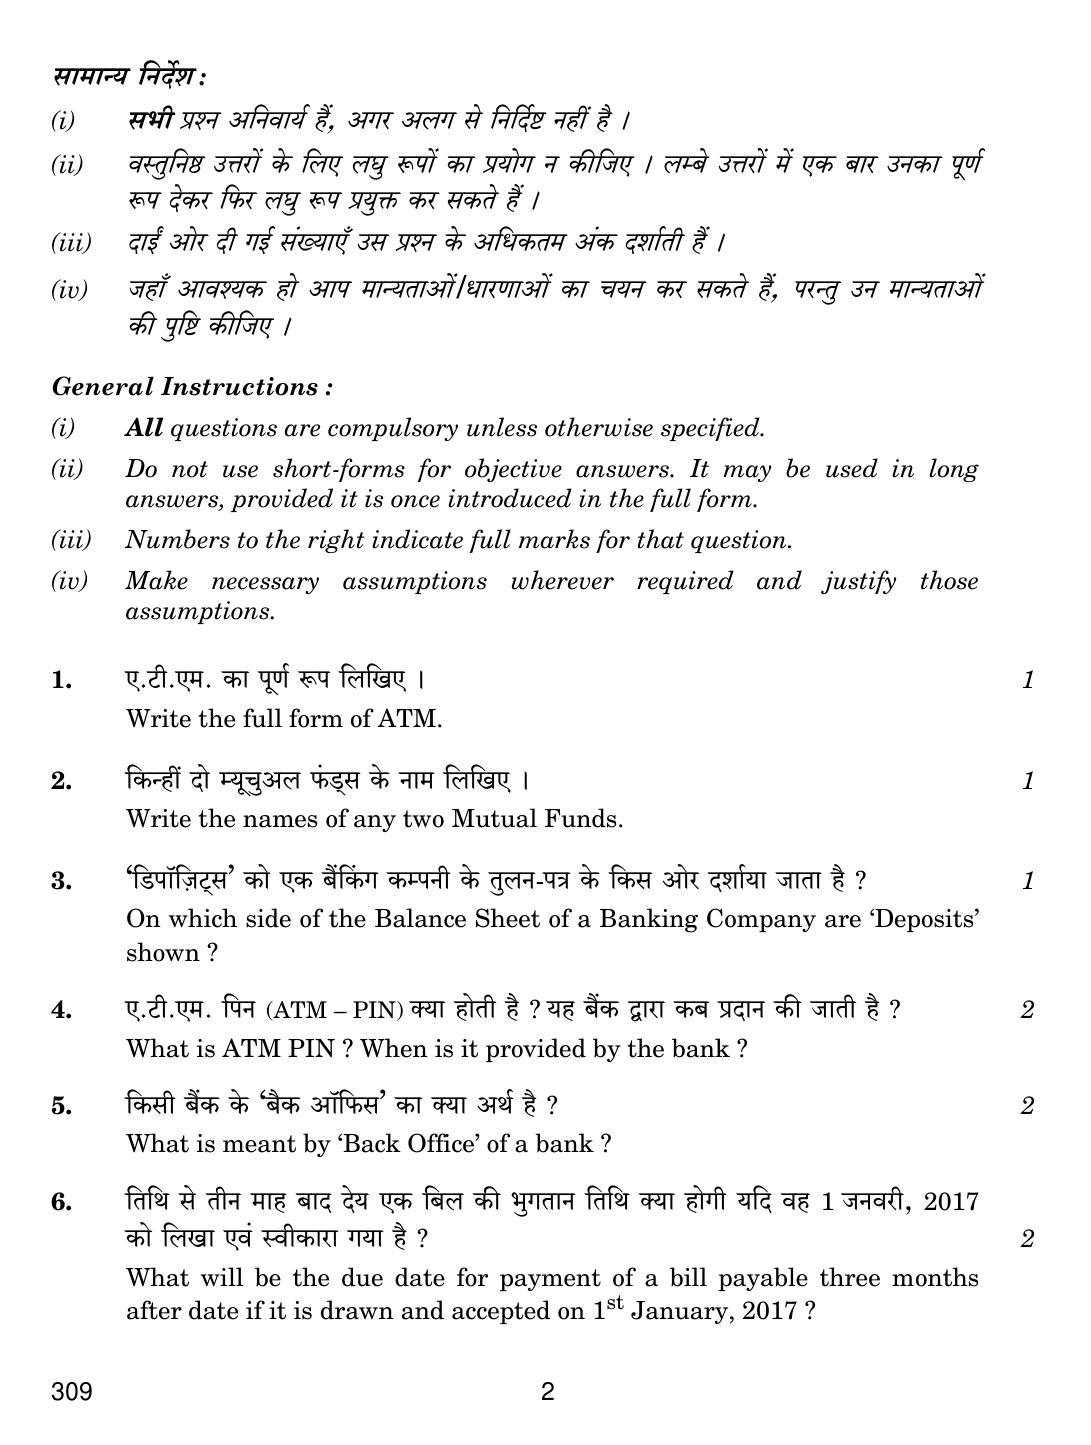 CBSE Class 12 309 BANKING 2018 Question Paper - Page 2